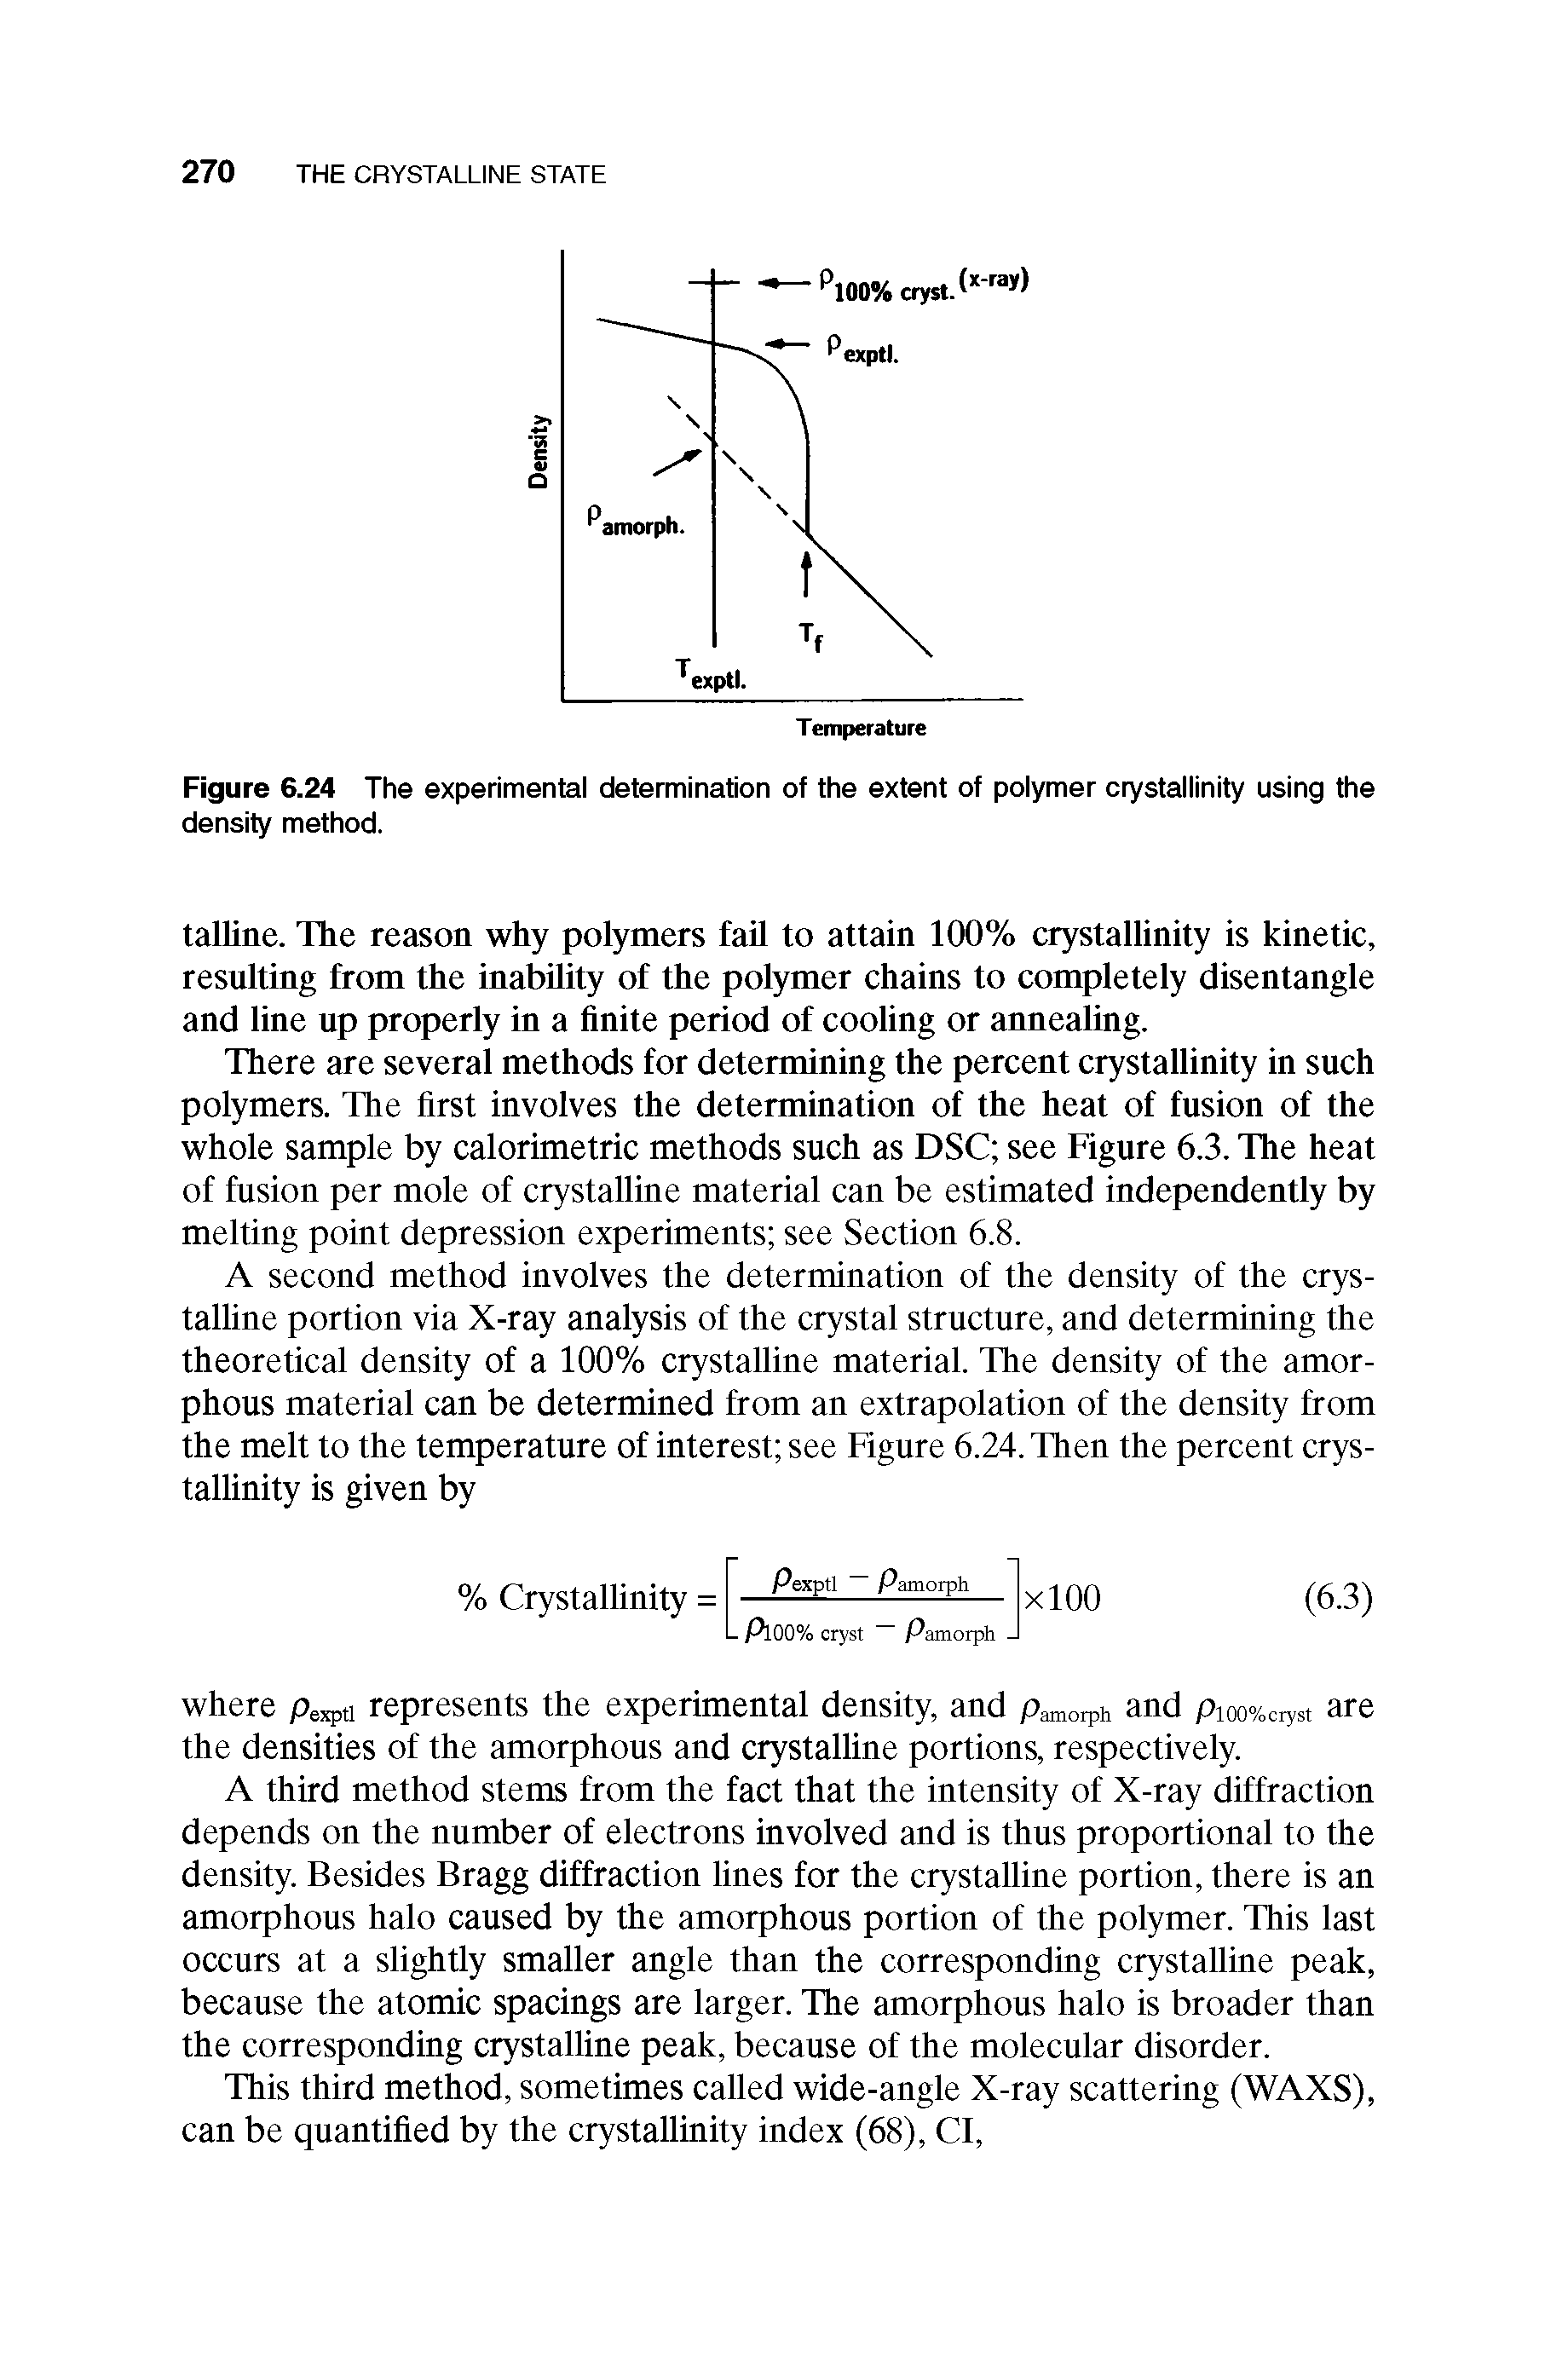 Figure 6.24 The experimental determination of the extent of polymer crystallinity using the density method.